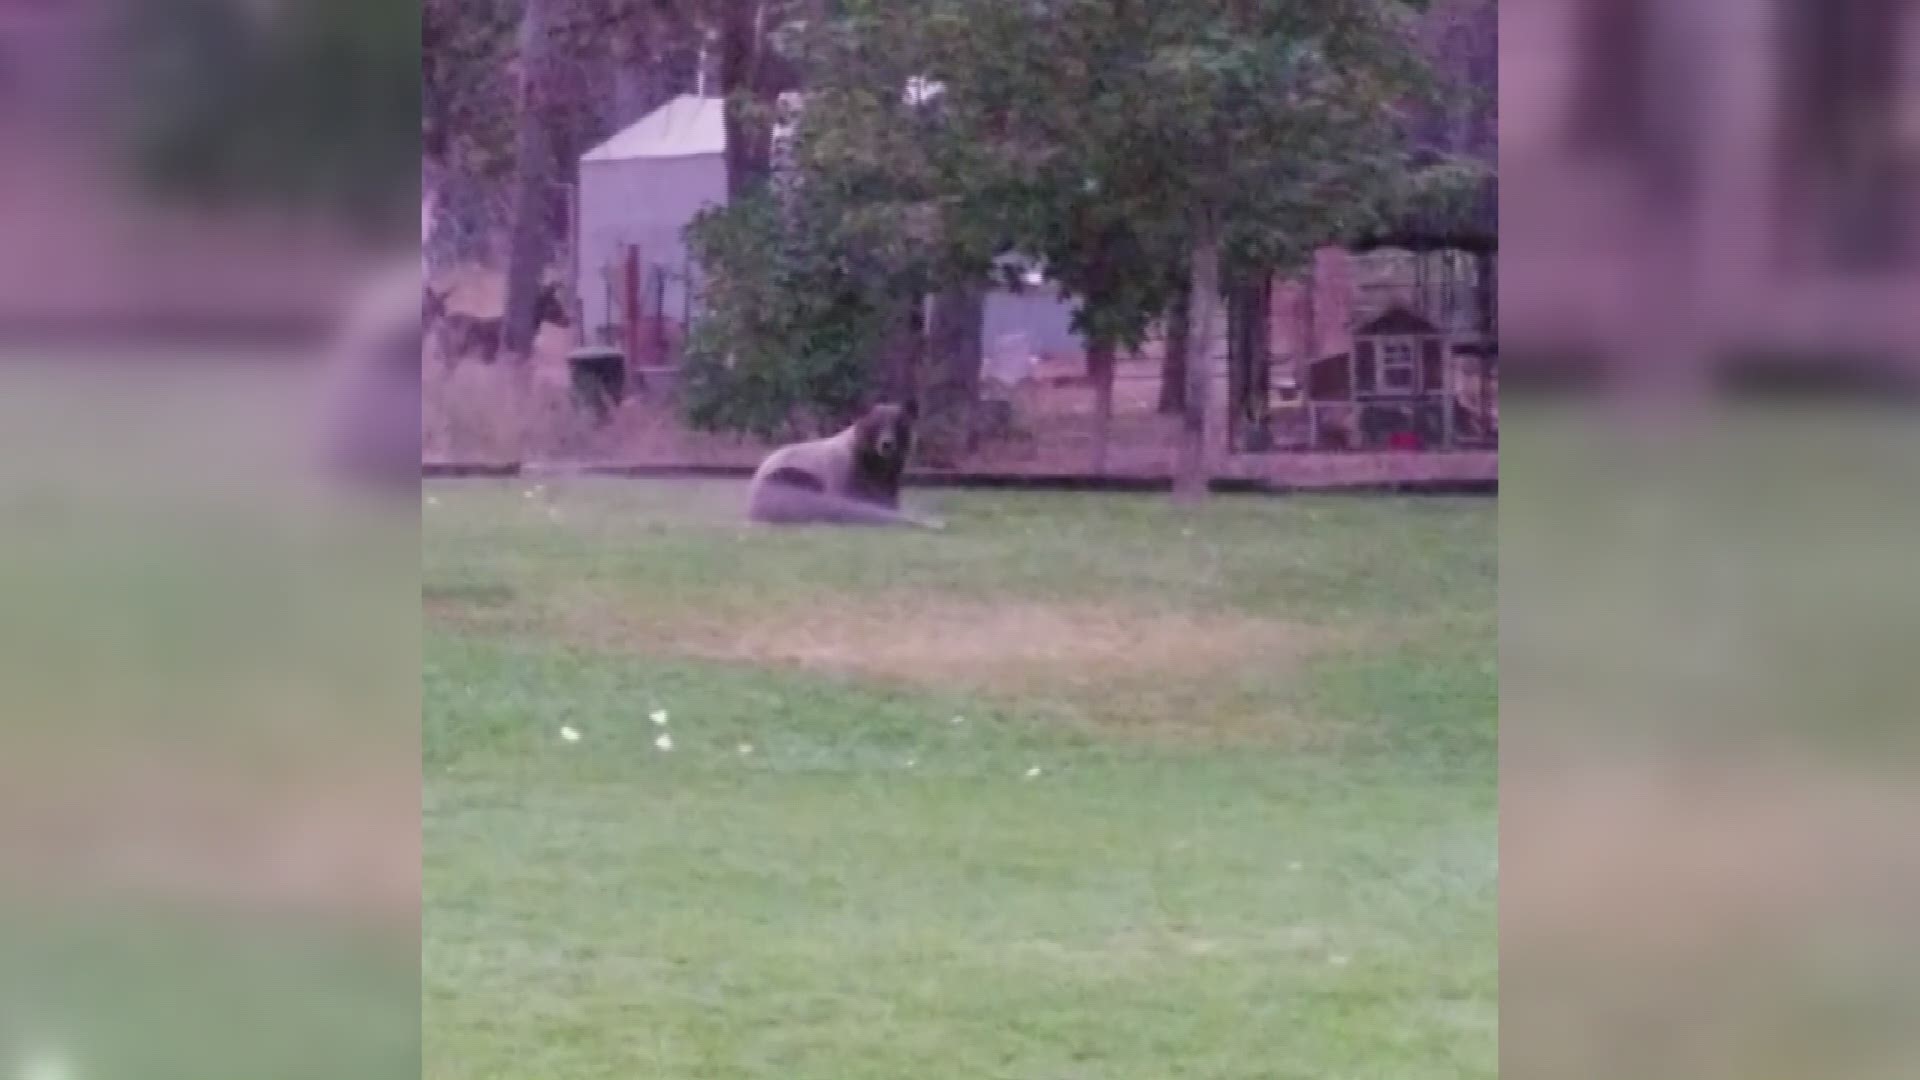 The bear ventured into the Kearl family's yard Sunday evening, and the family got the whole thing on camera.